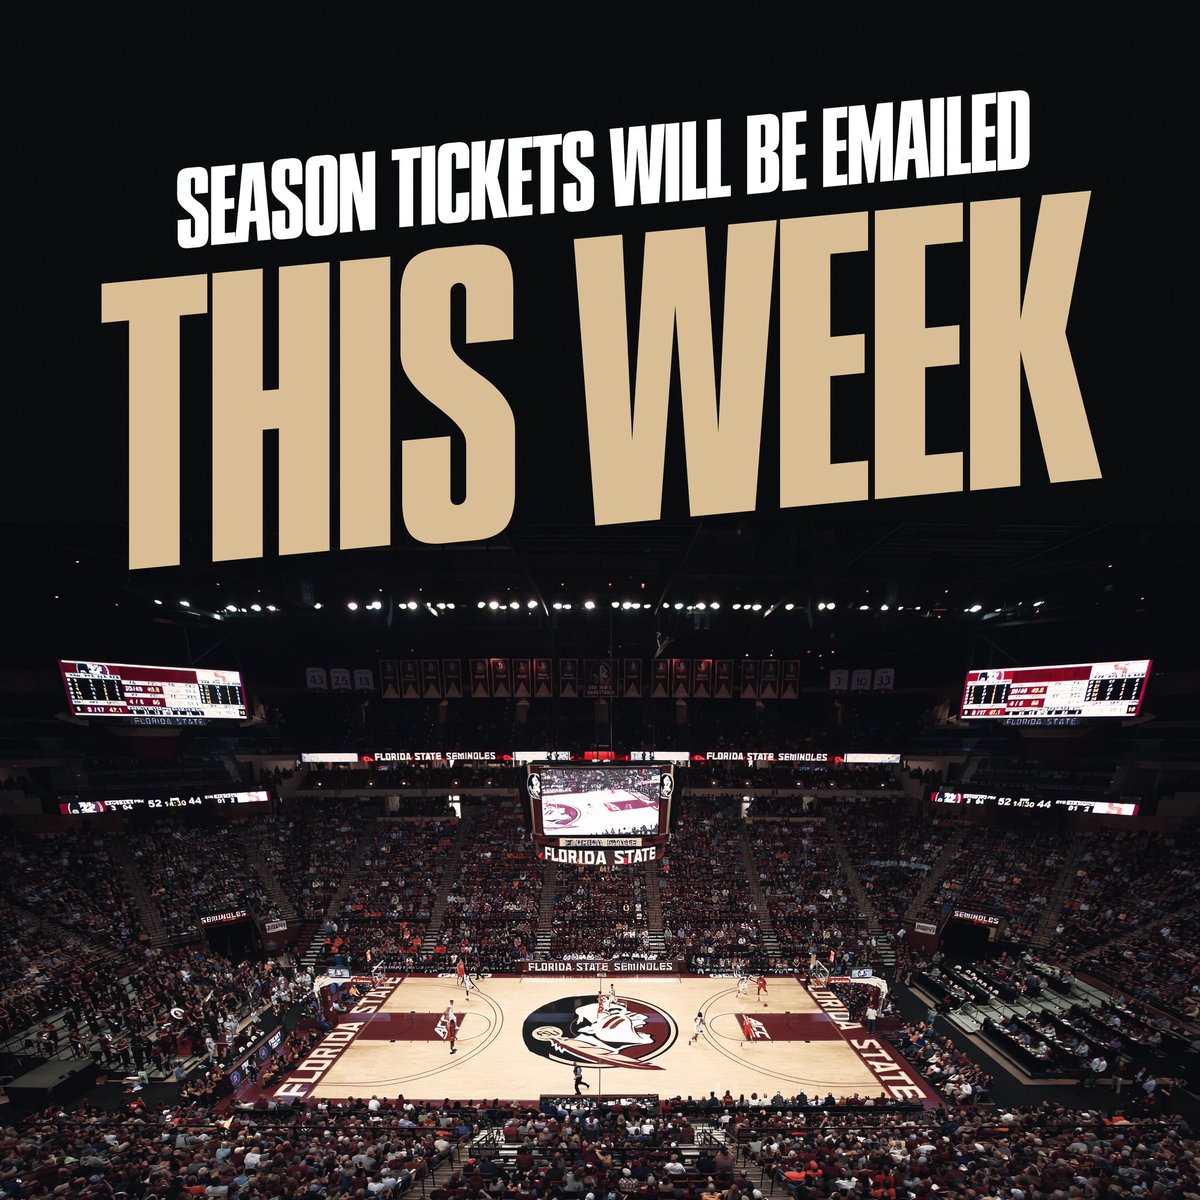 Season tickets for both @fsuwbb and @FSUHoops will be hitting inboxes soon! #PackTheTuck #OneTribe